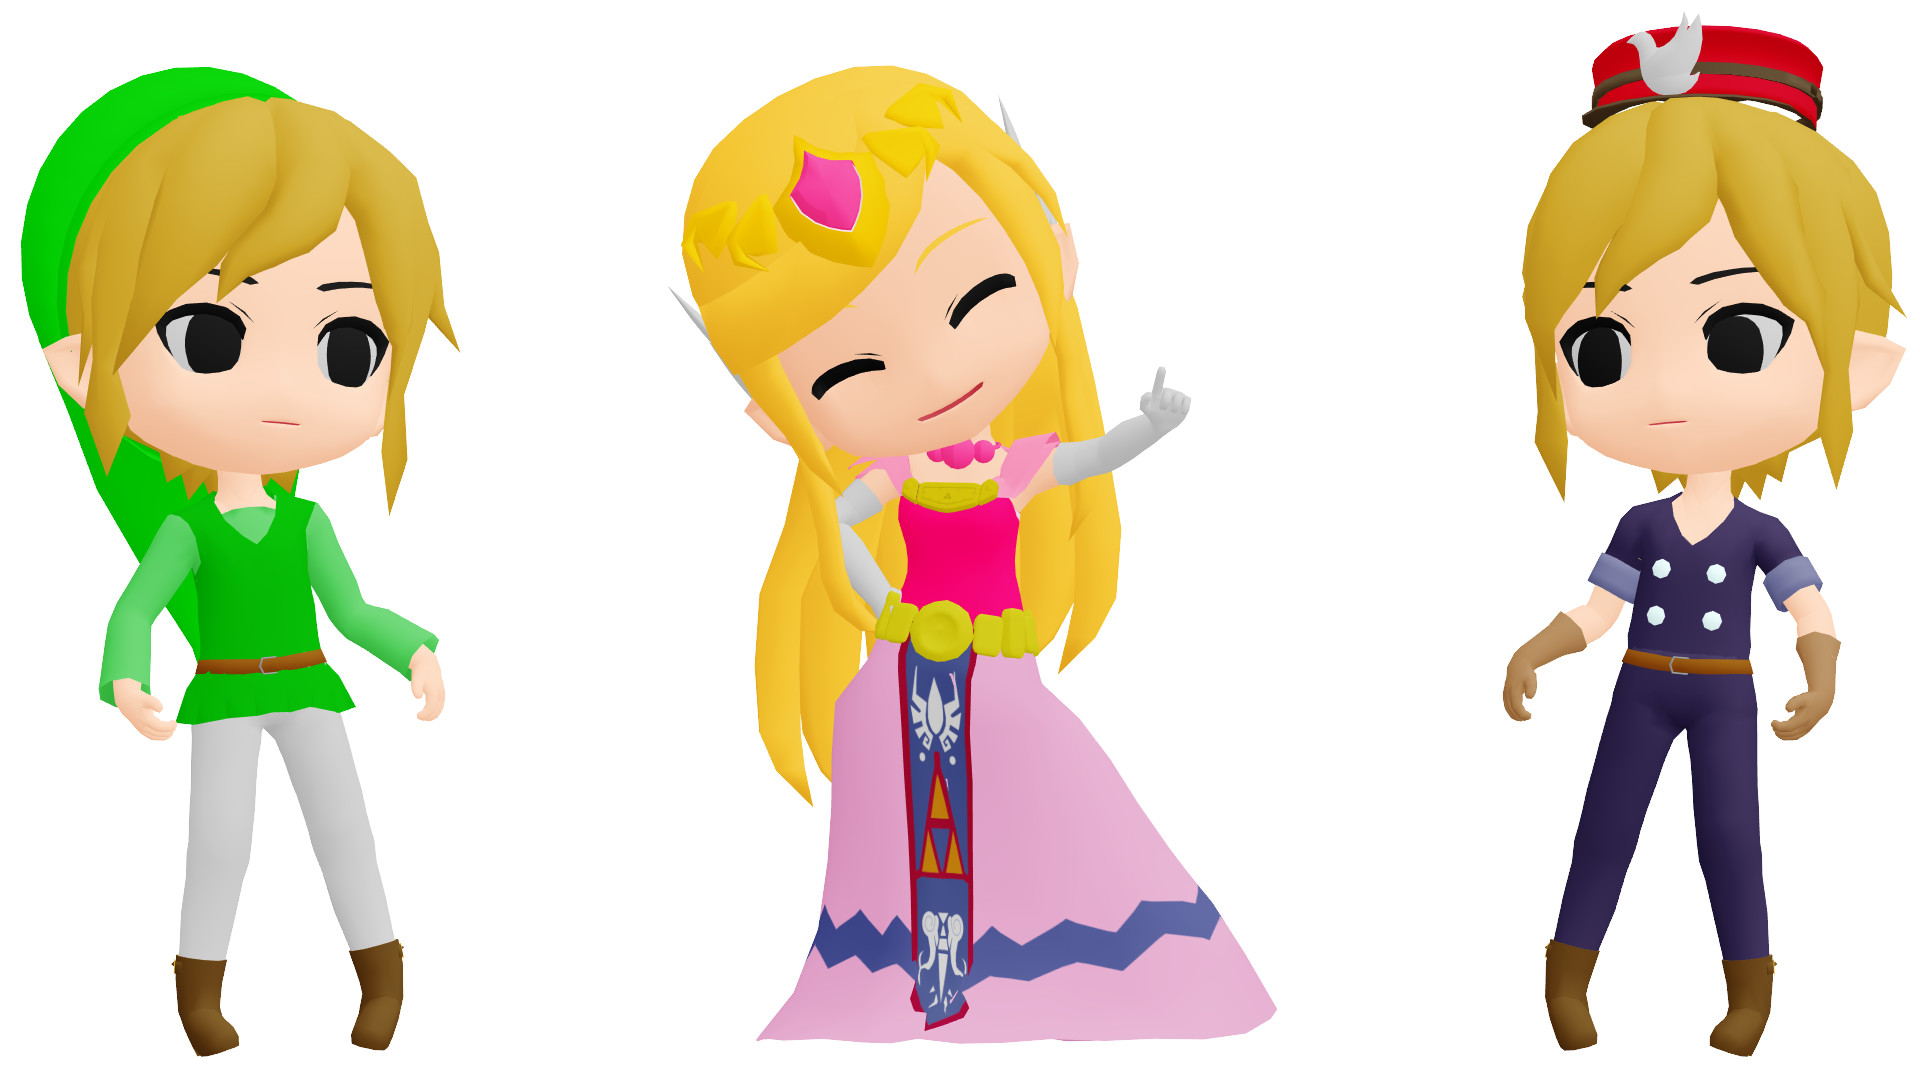 MMD Toon Link and Toon Zelda DL by 2234083174